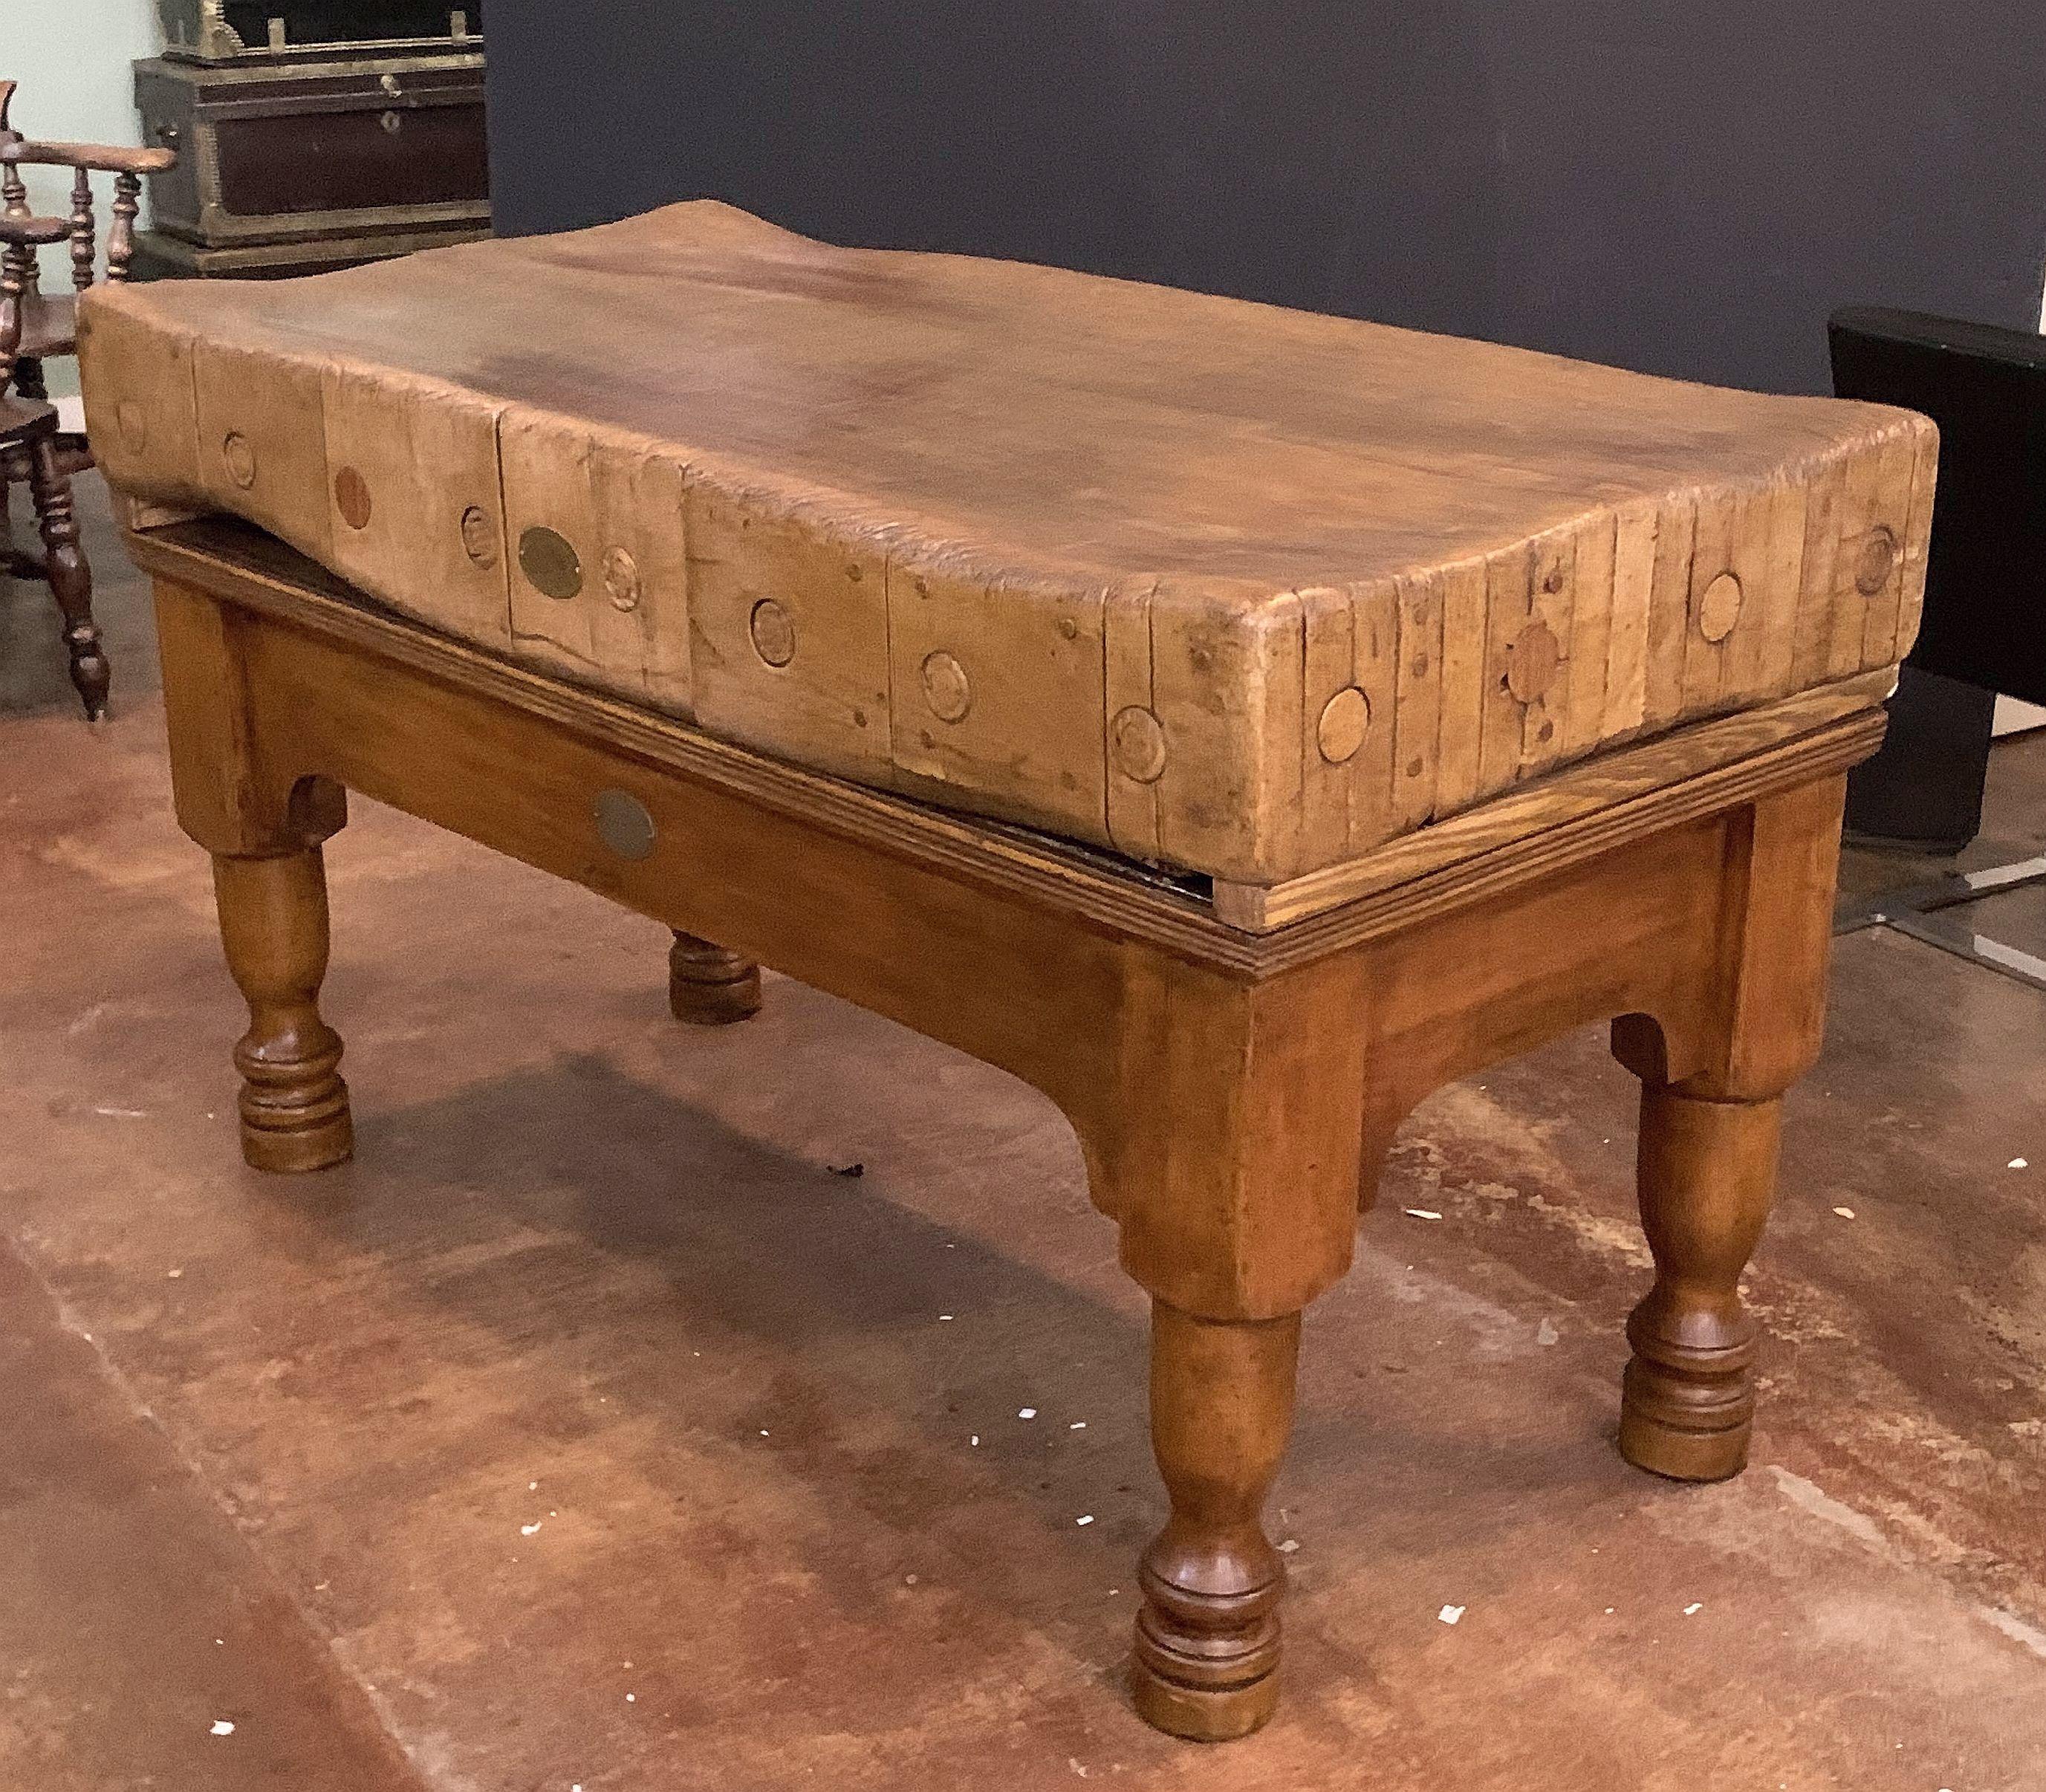 A handsome large English butcher's chopping block table, featuring a large, rectangular block or slab of wood set upon a bottom tier four-legged support stand. Ships in two pieces.

Oval brass medallion: William Douglas & Sons, Ltd., Putney,